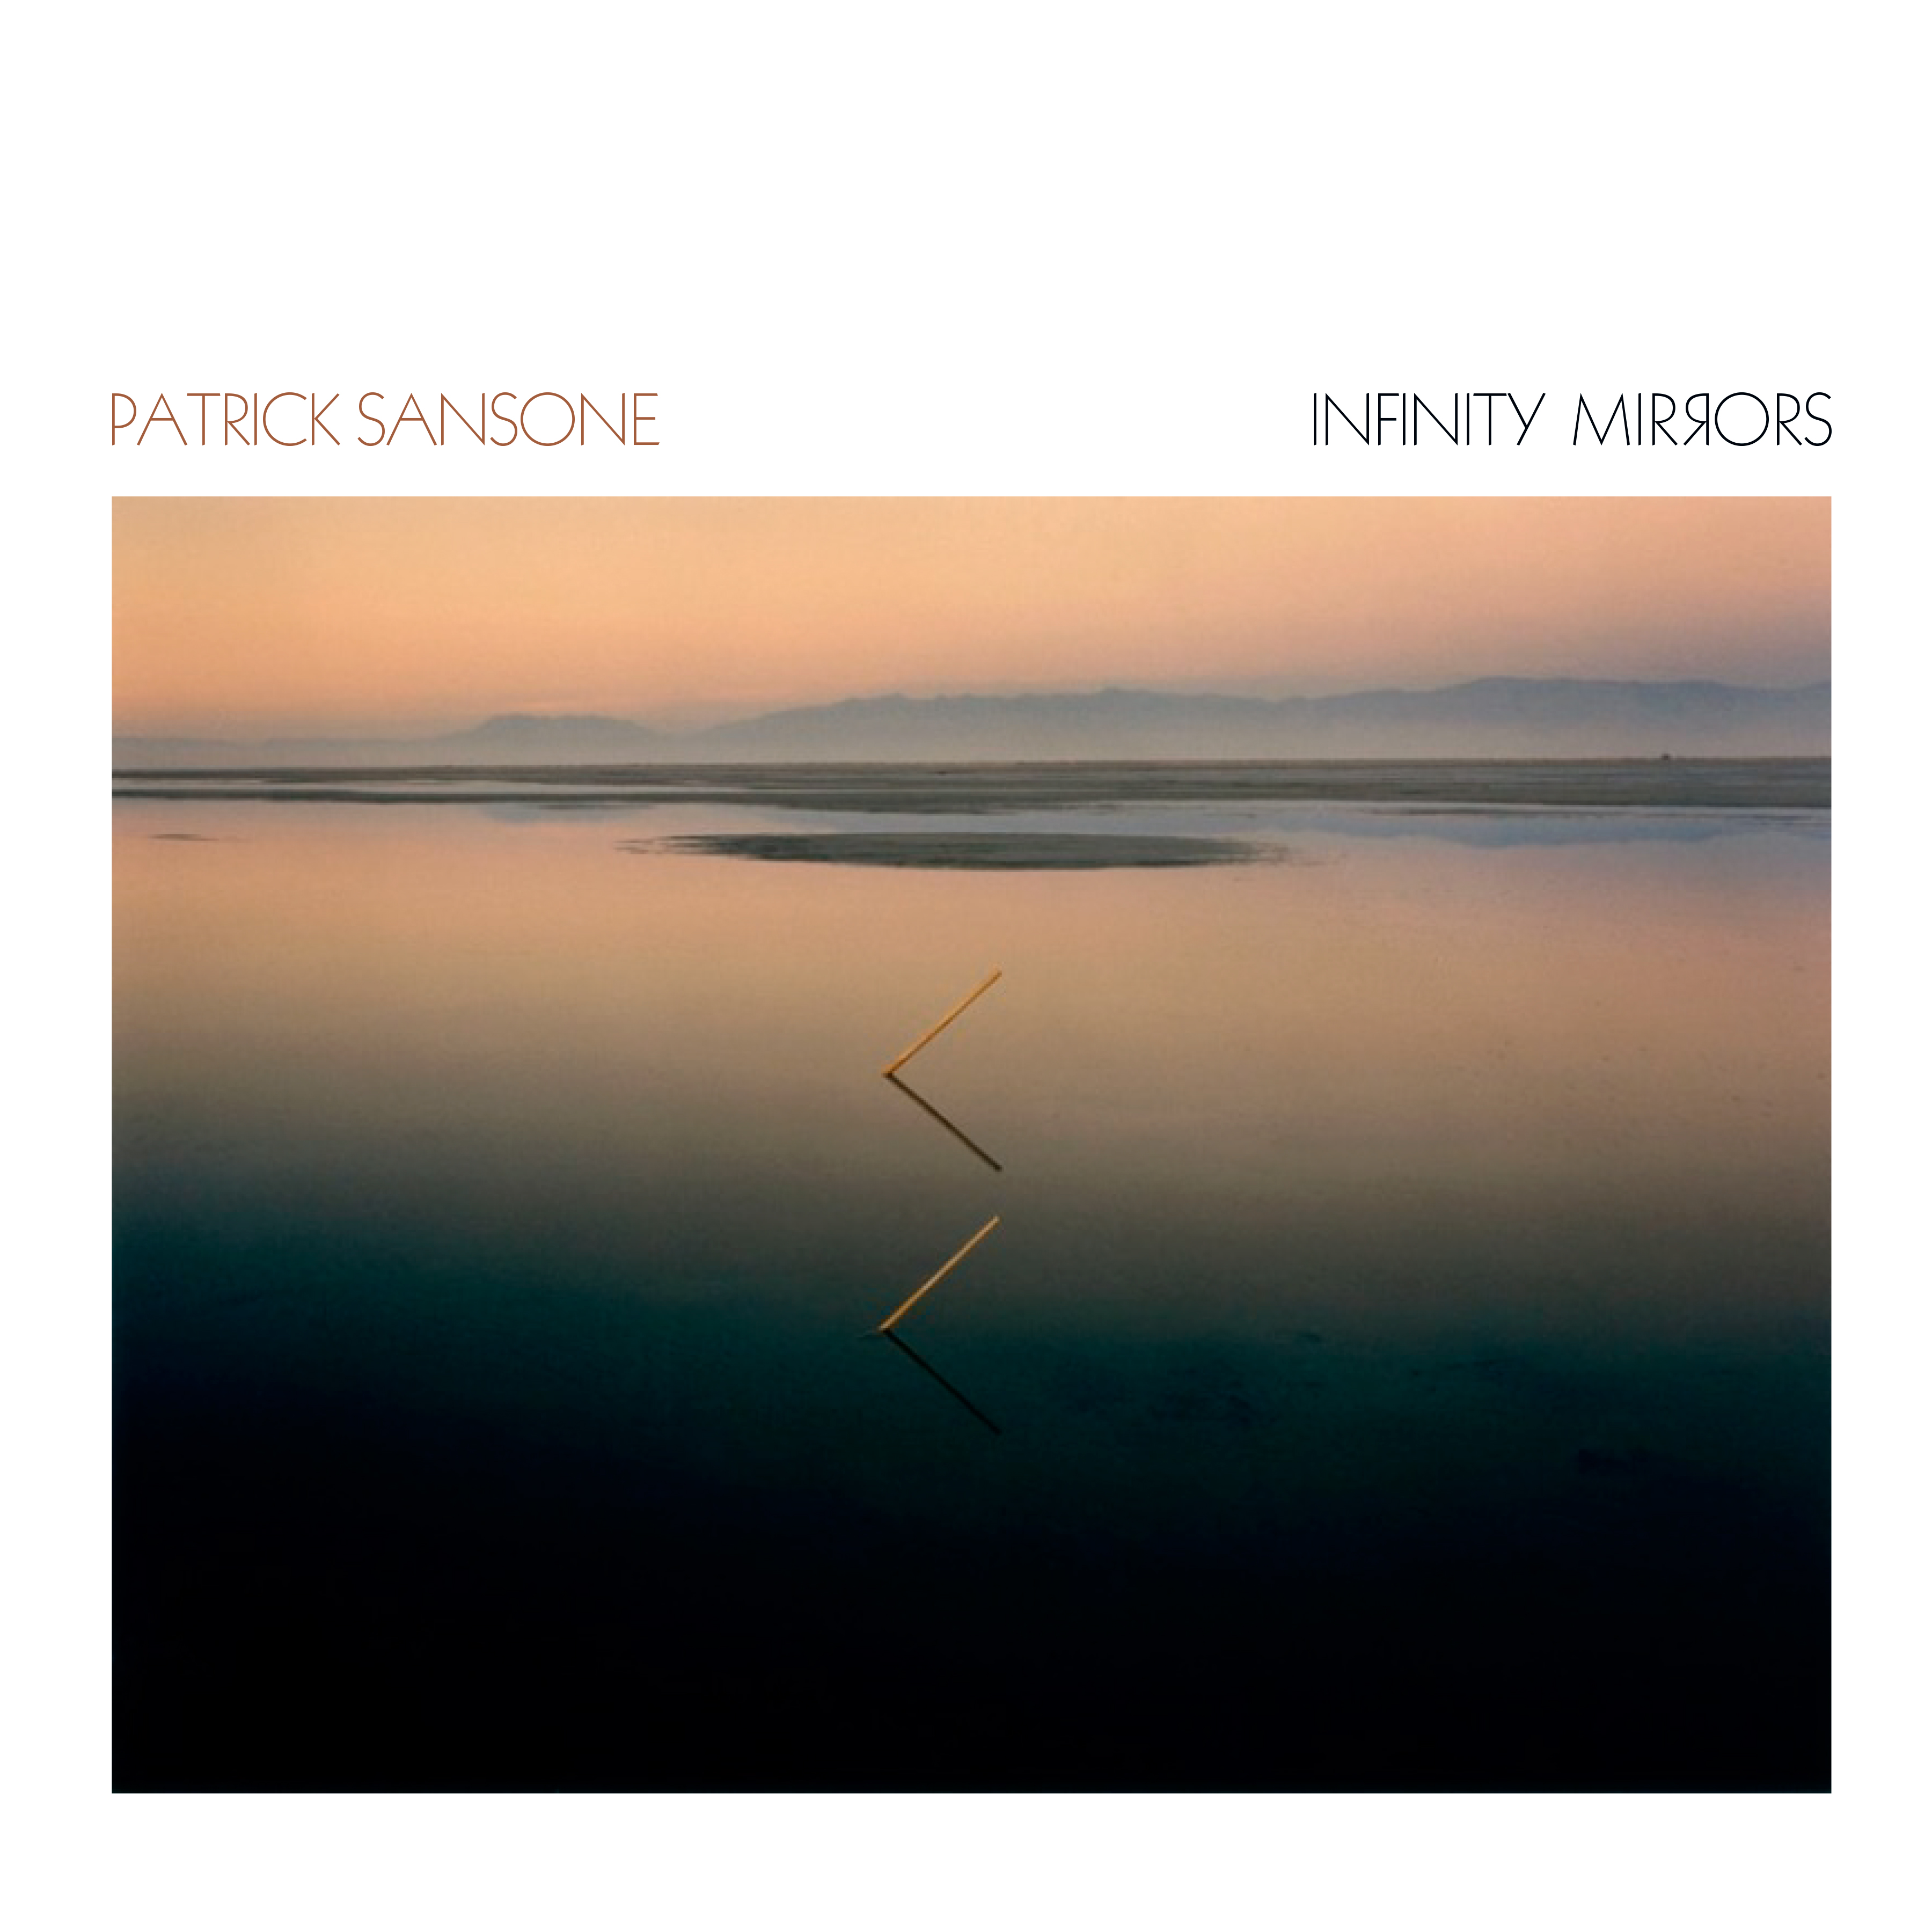 Patrick Sansone to release 'Infinity Mirrors' March 1st.